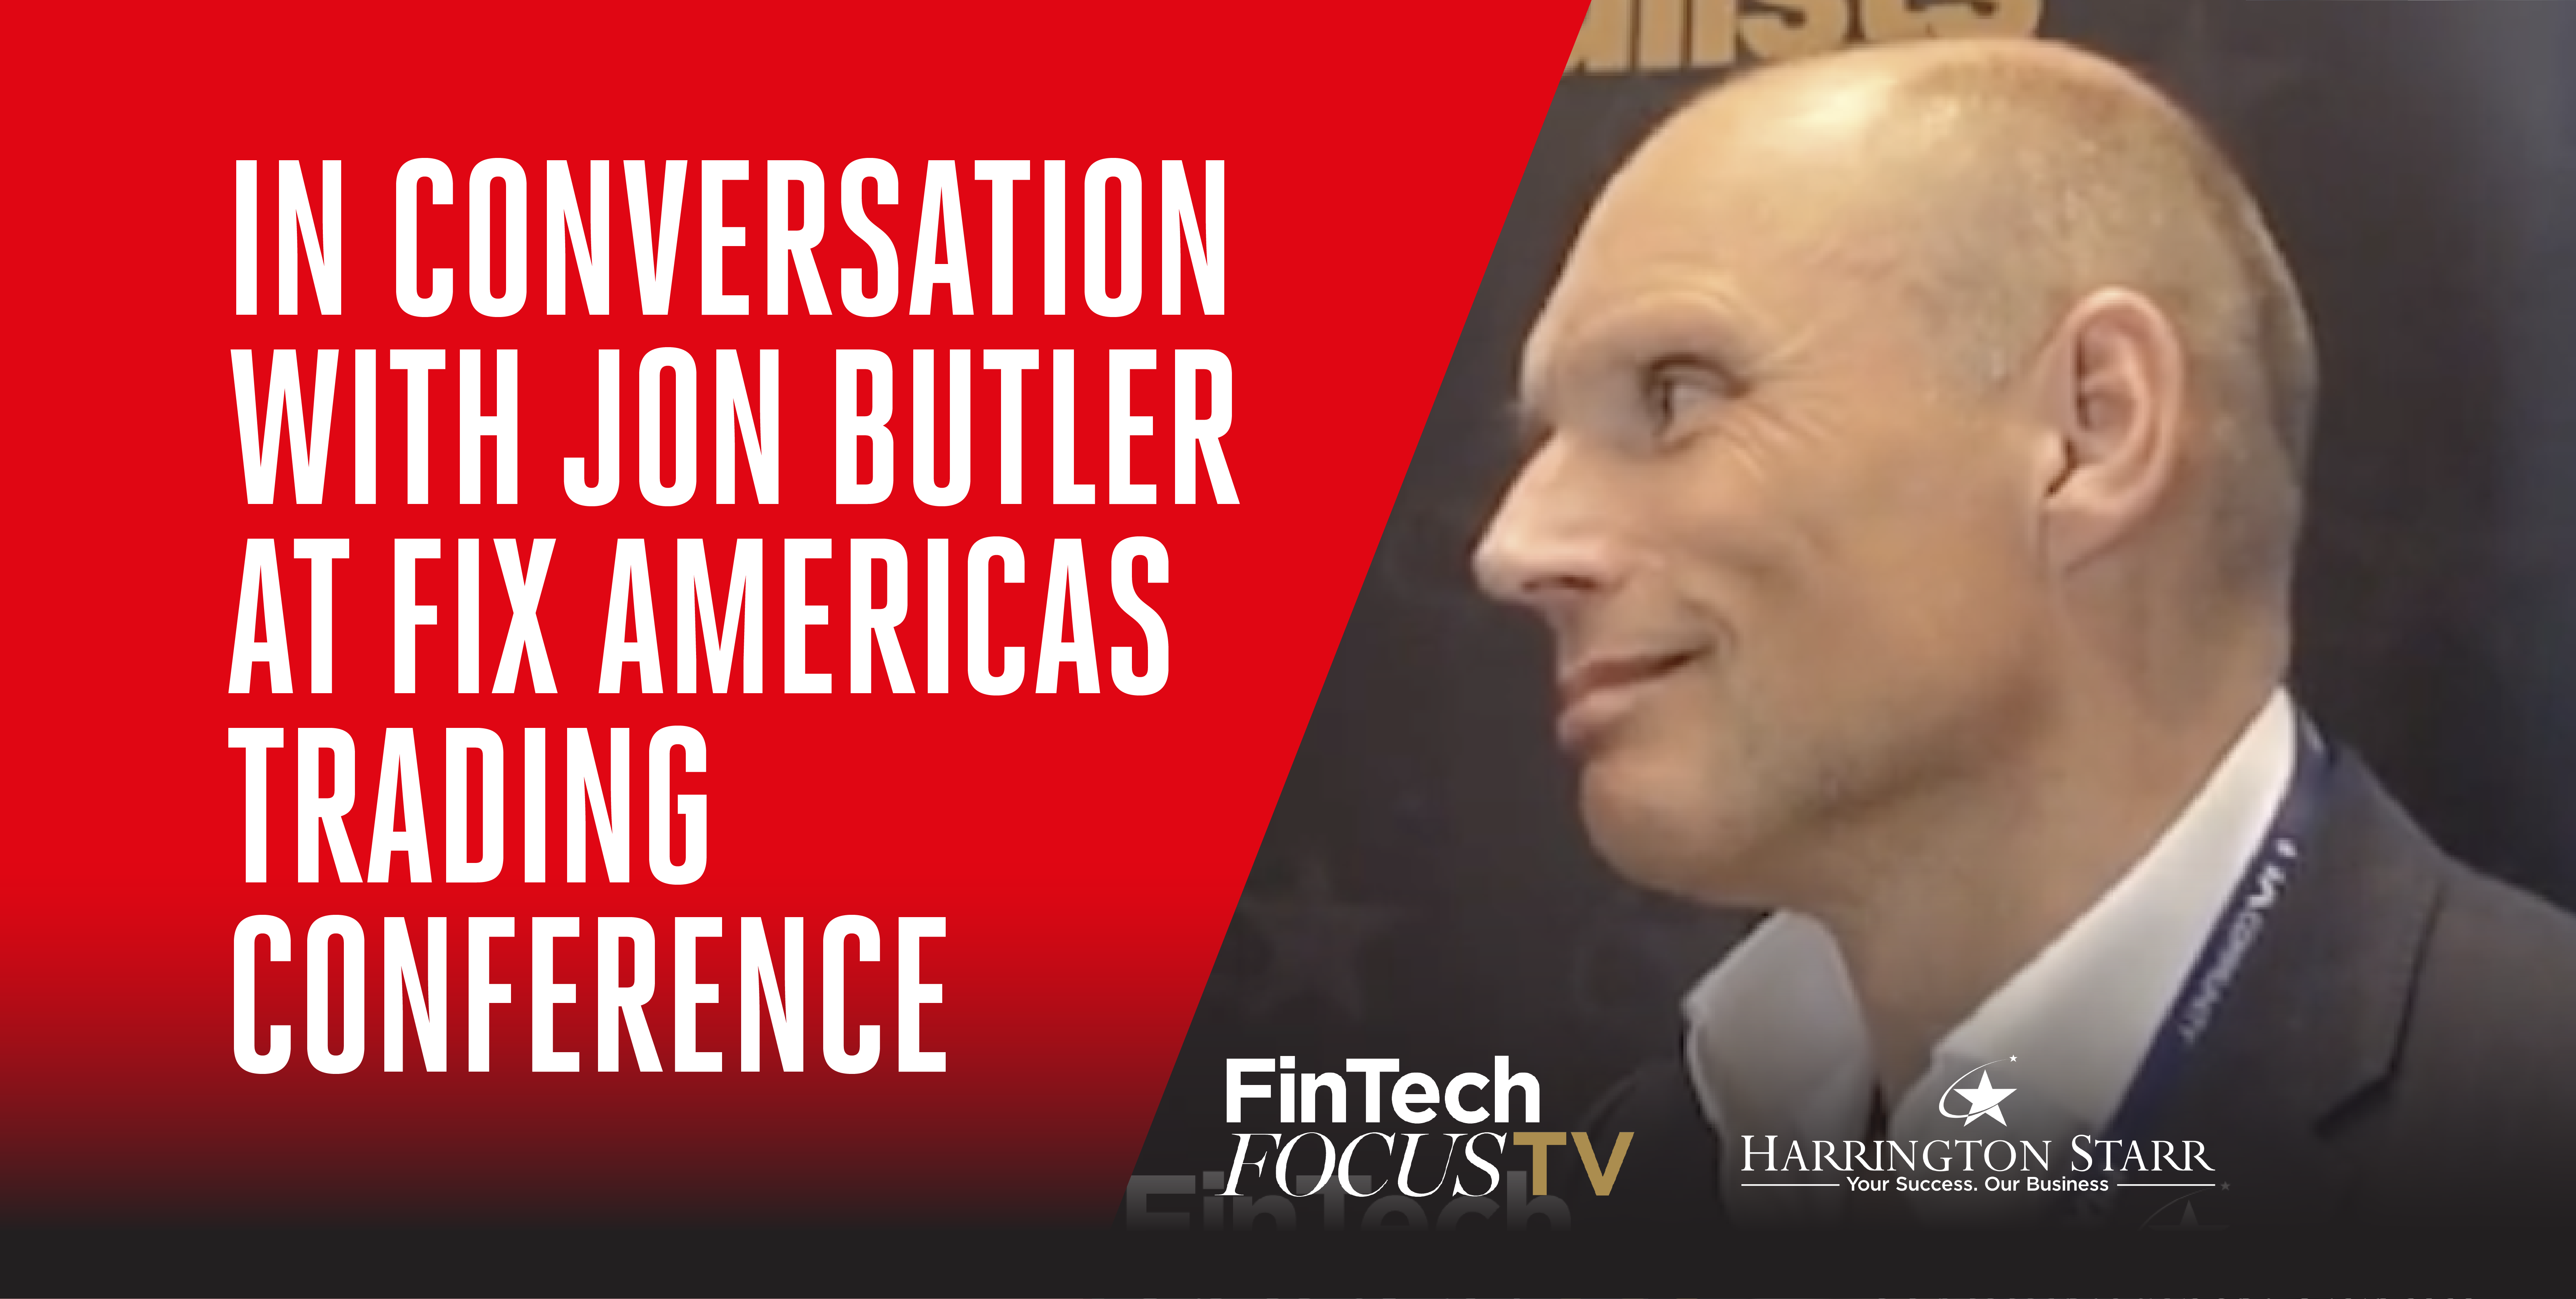 In Conversation with Jon Butler at FIX Americas Trading Conference